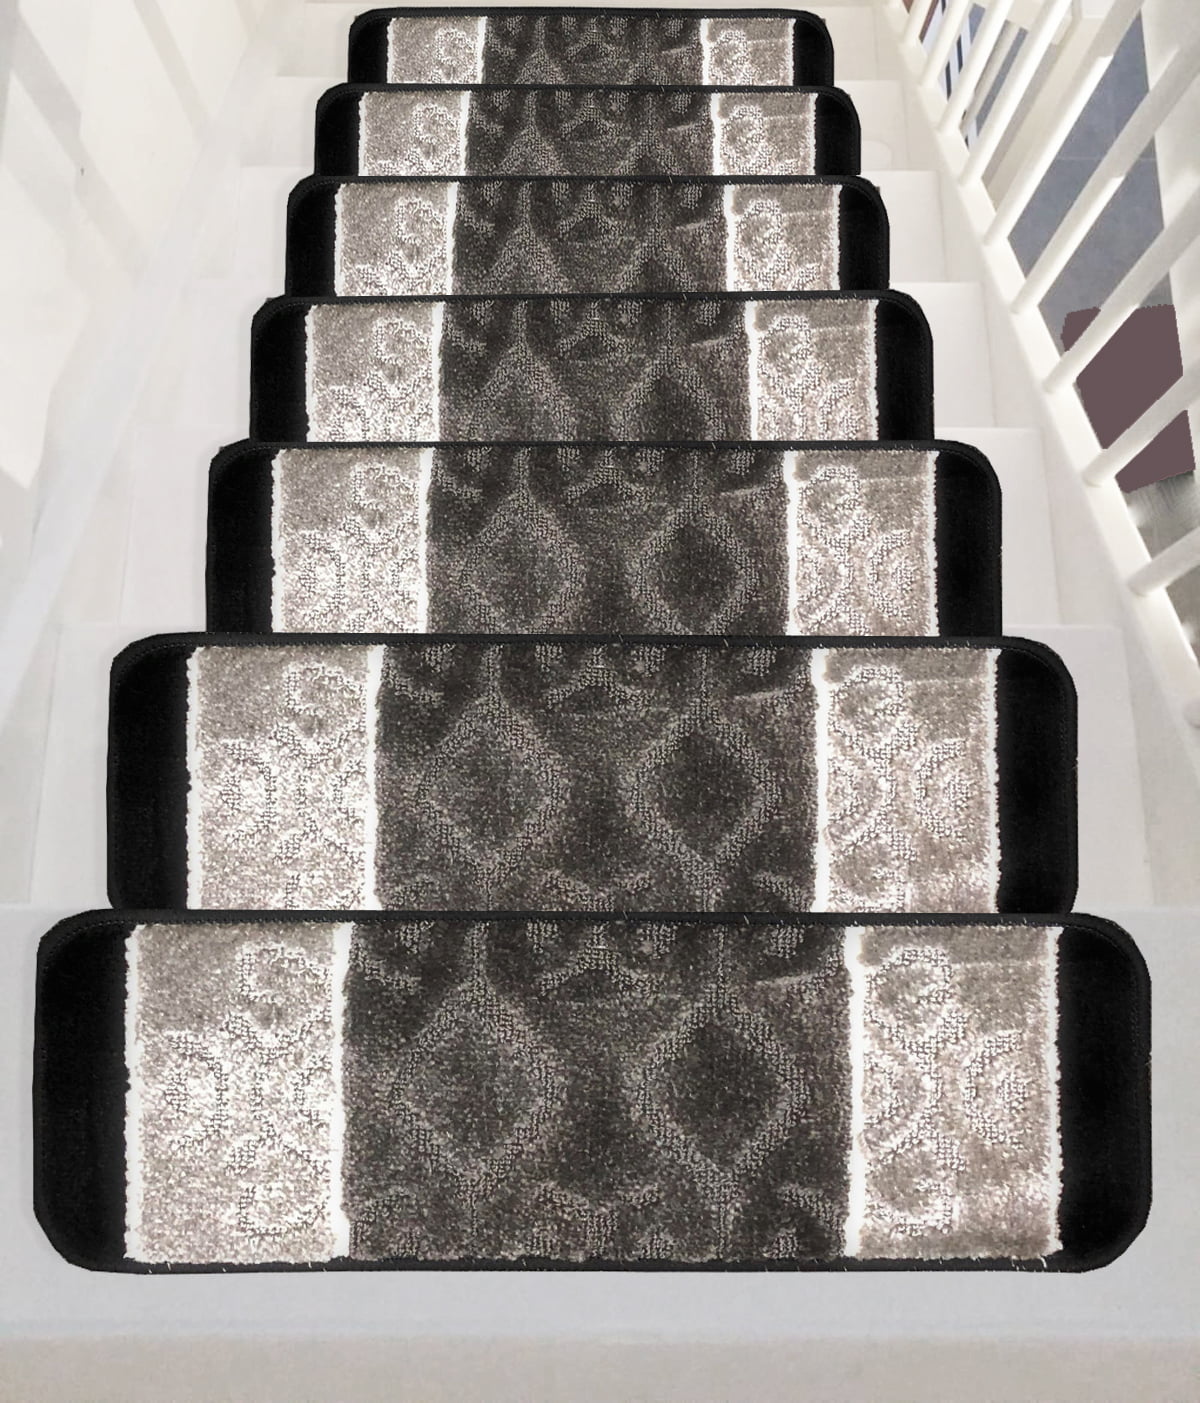 Washable Stair Mat Area Rug gloria Rug STAIR PAD Skid-Resistant Rubber Backing Gripper Non-Slip Carpet Stair Treads SET OF 7 8.5 x 26, 1933-NVY-FL-EU 8.5 x 26, 